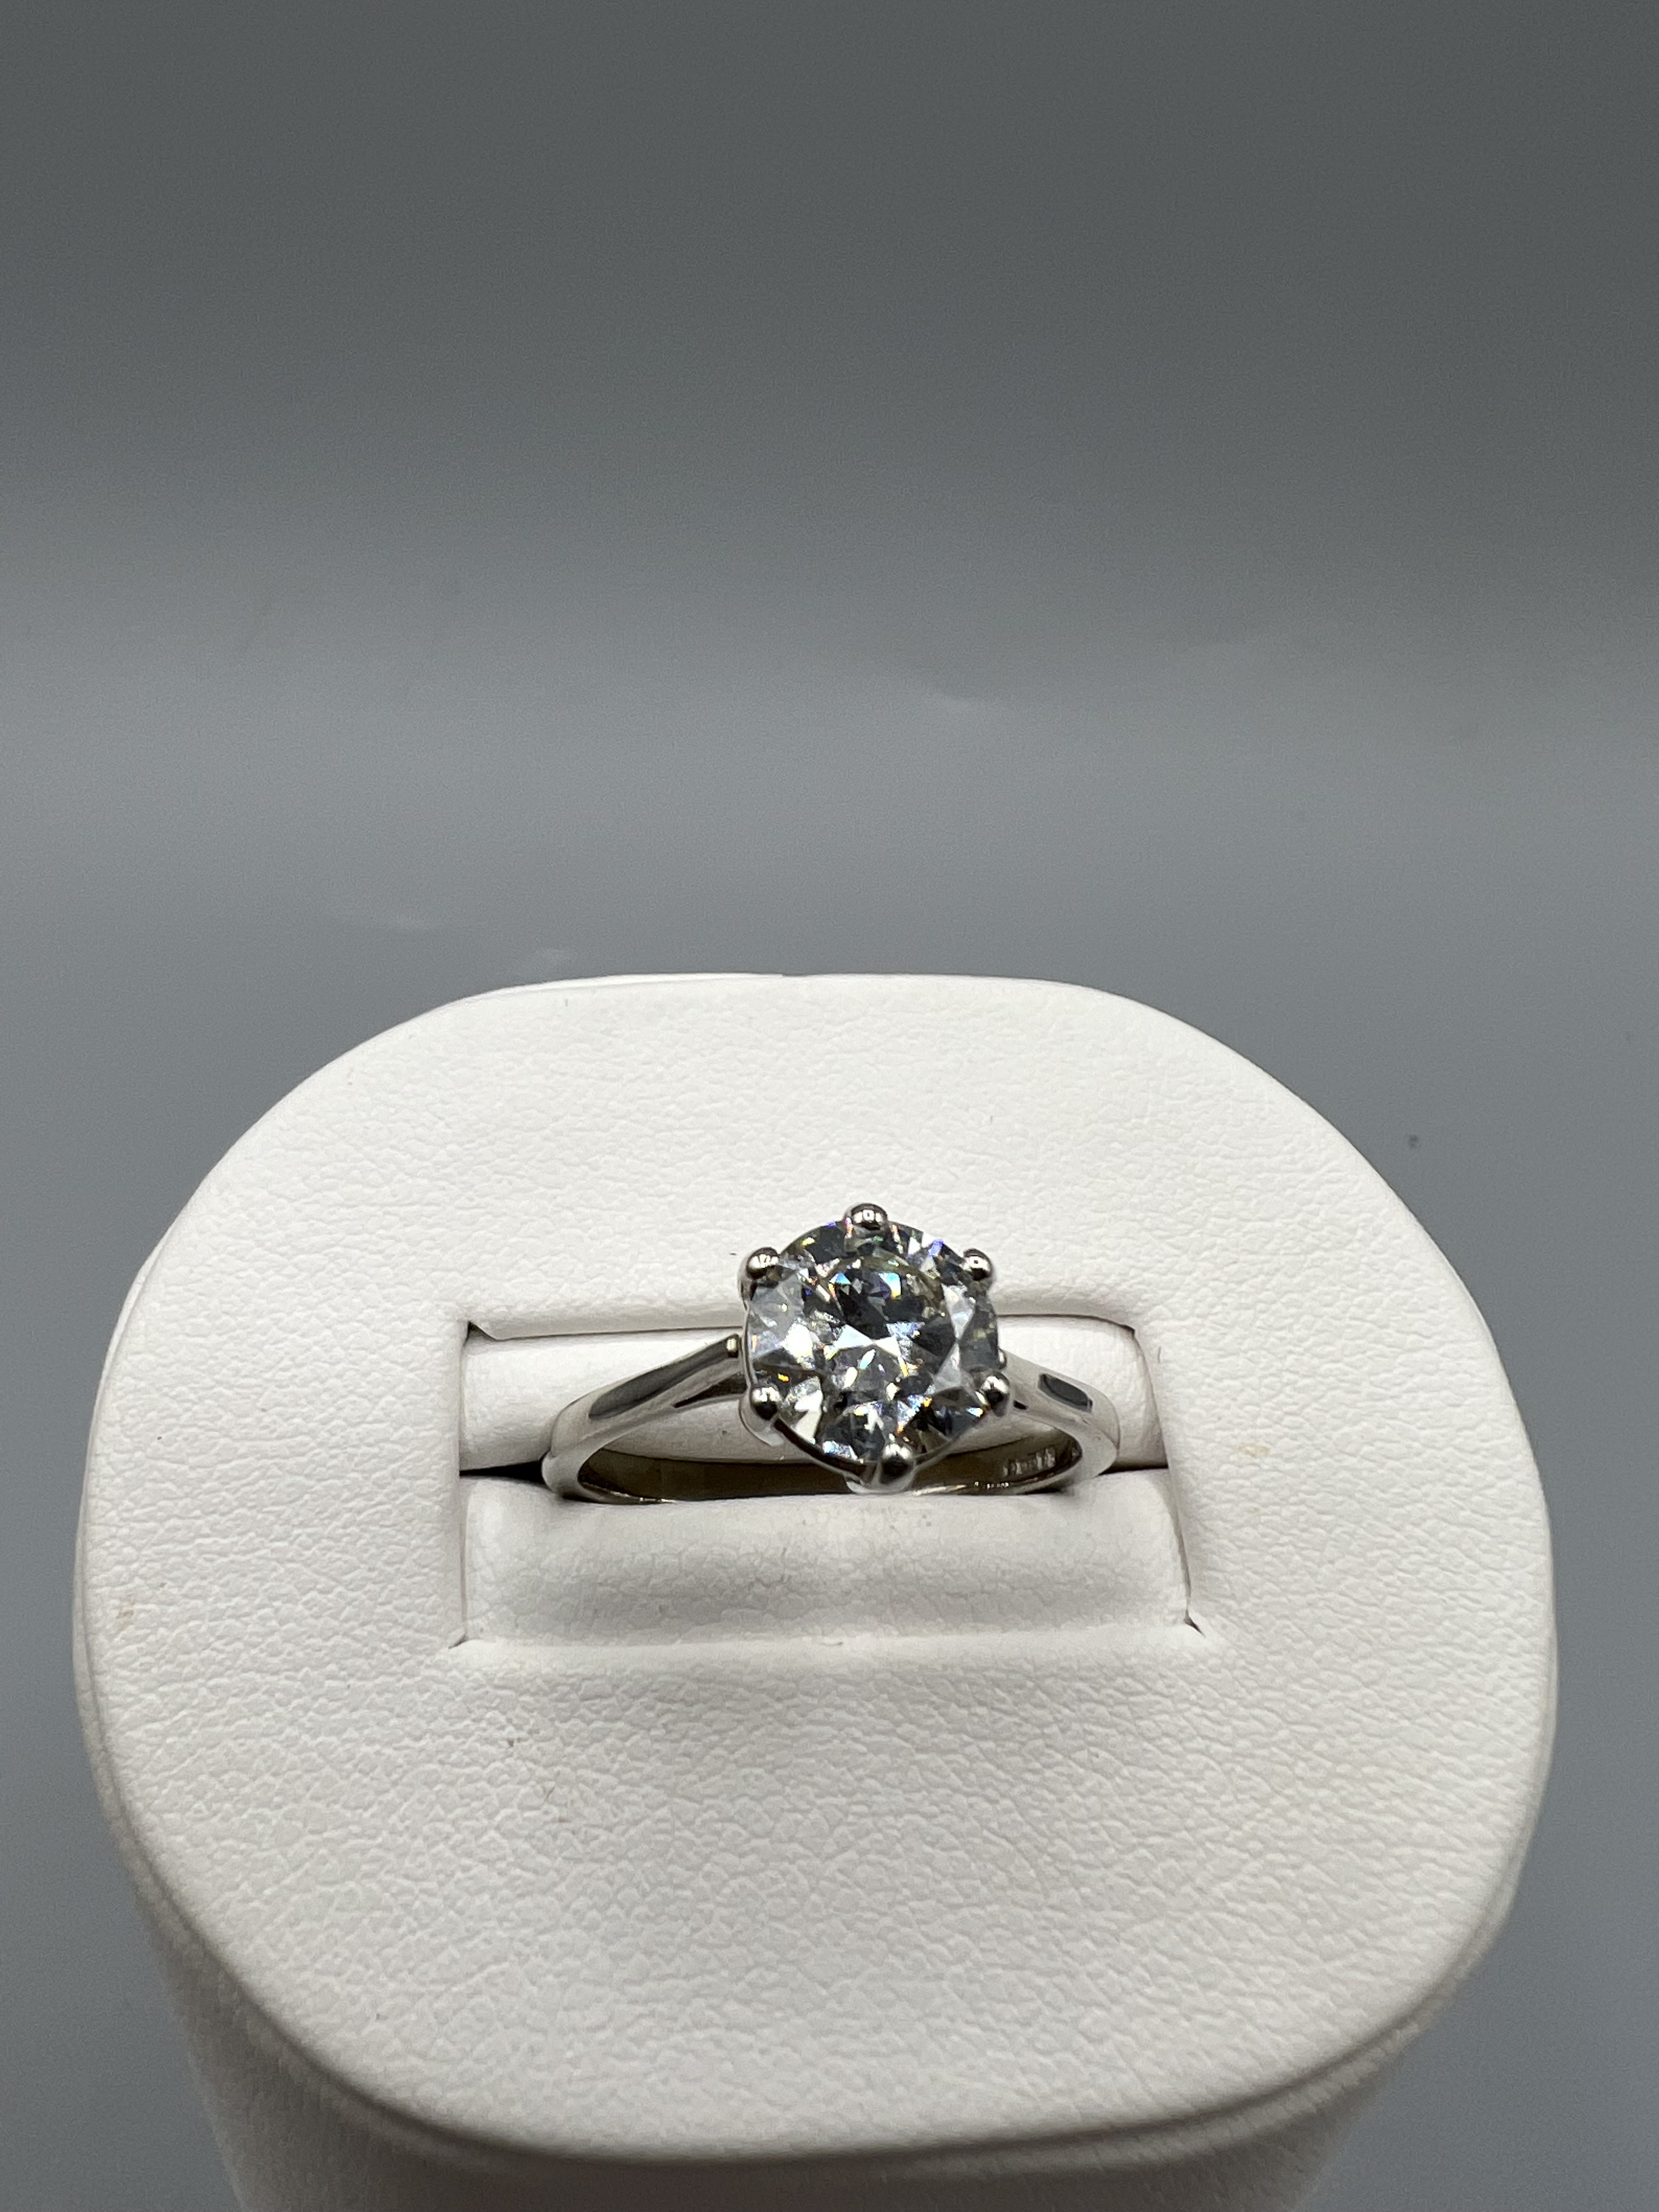 Natural 1.48ct Round Brilliant Diamond Solitaire Ring Certified J VS1 in Platinum Mount - Like New - Image 2 of 3